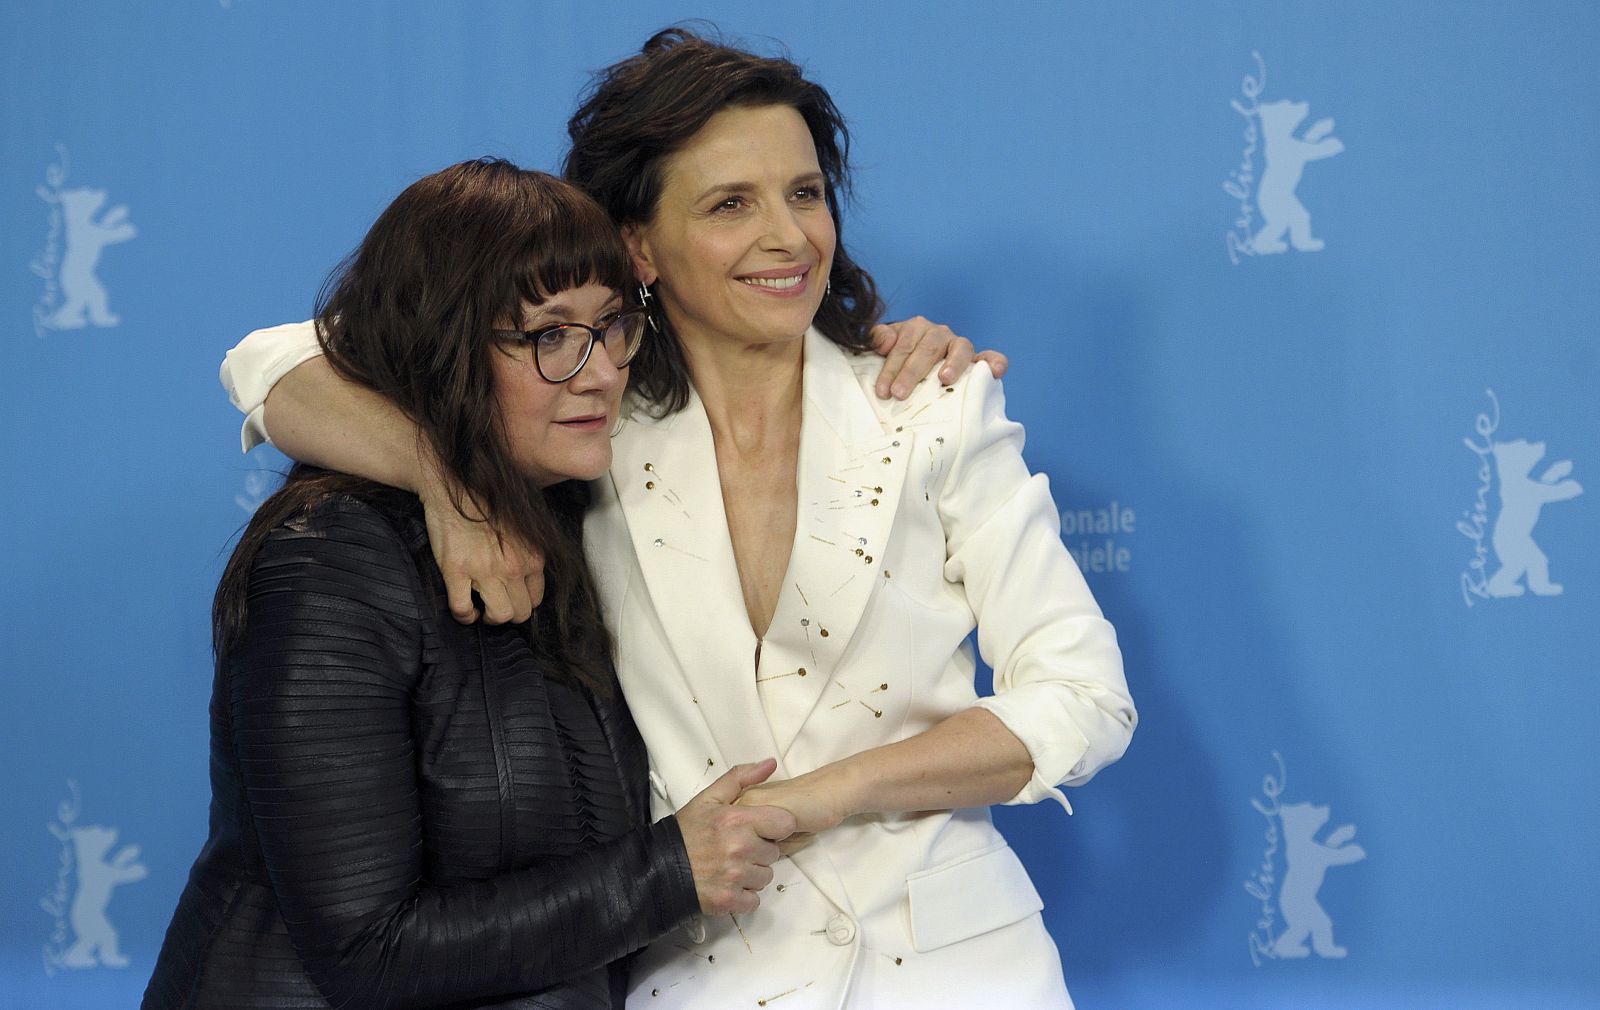 Actor Binoche and director Coixe arrive for photocall at 65th Berlinale International Film Festival in Berlin